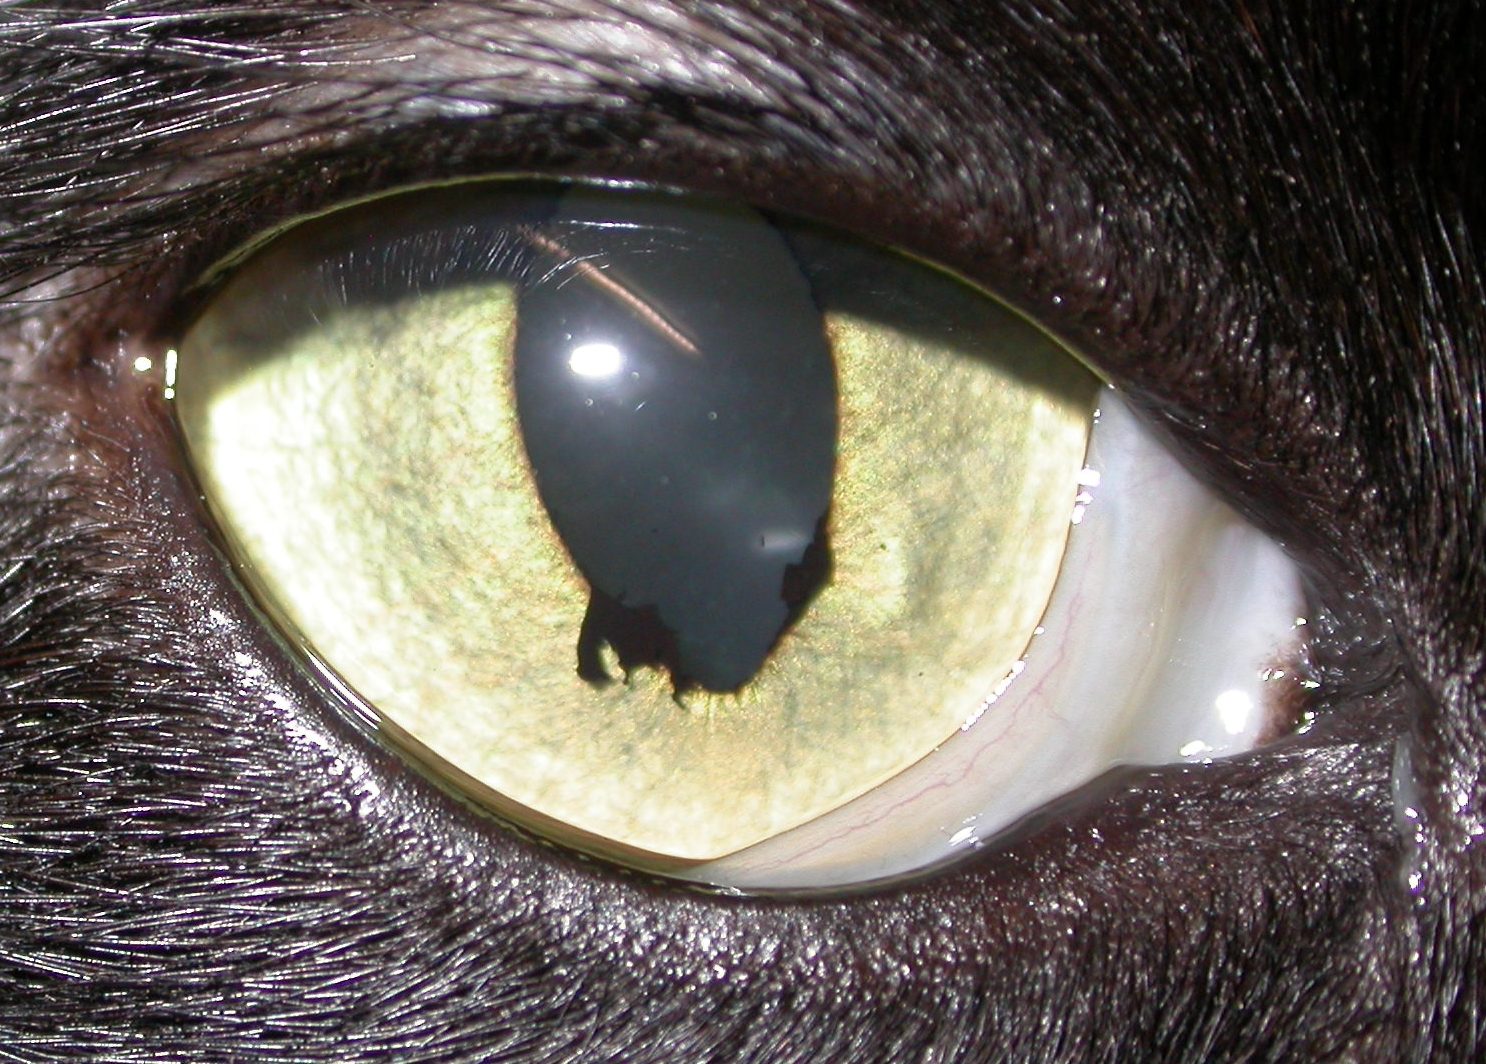 Veterinary ophthalmology …case histories, research and news Page 3